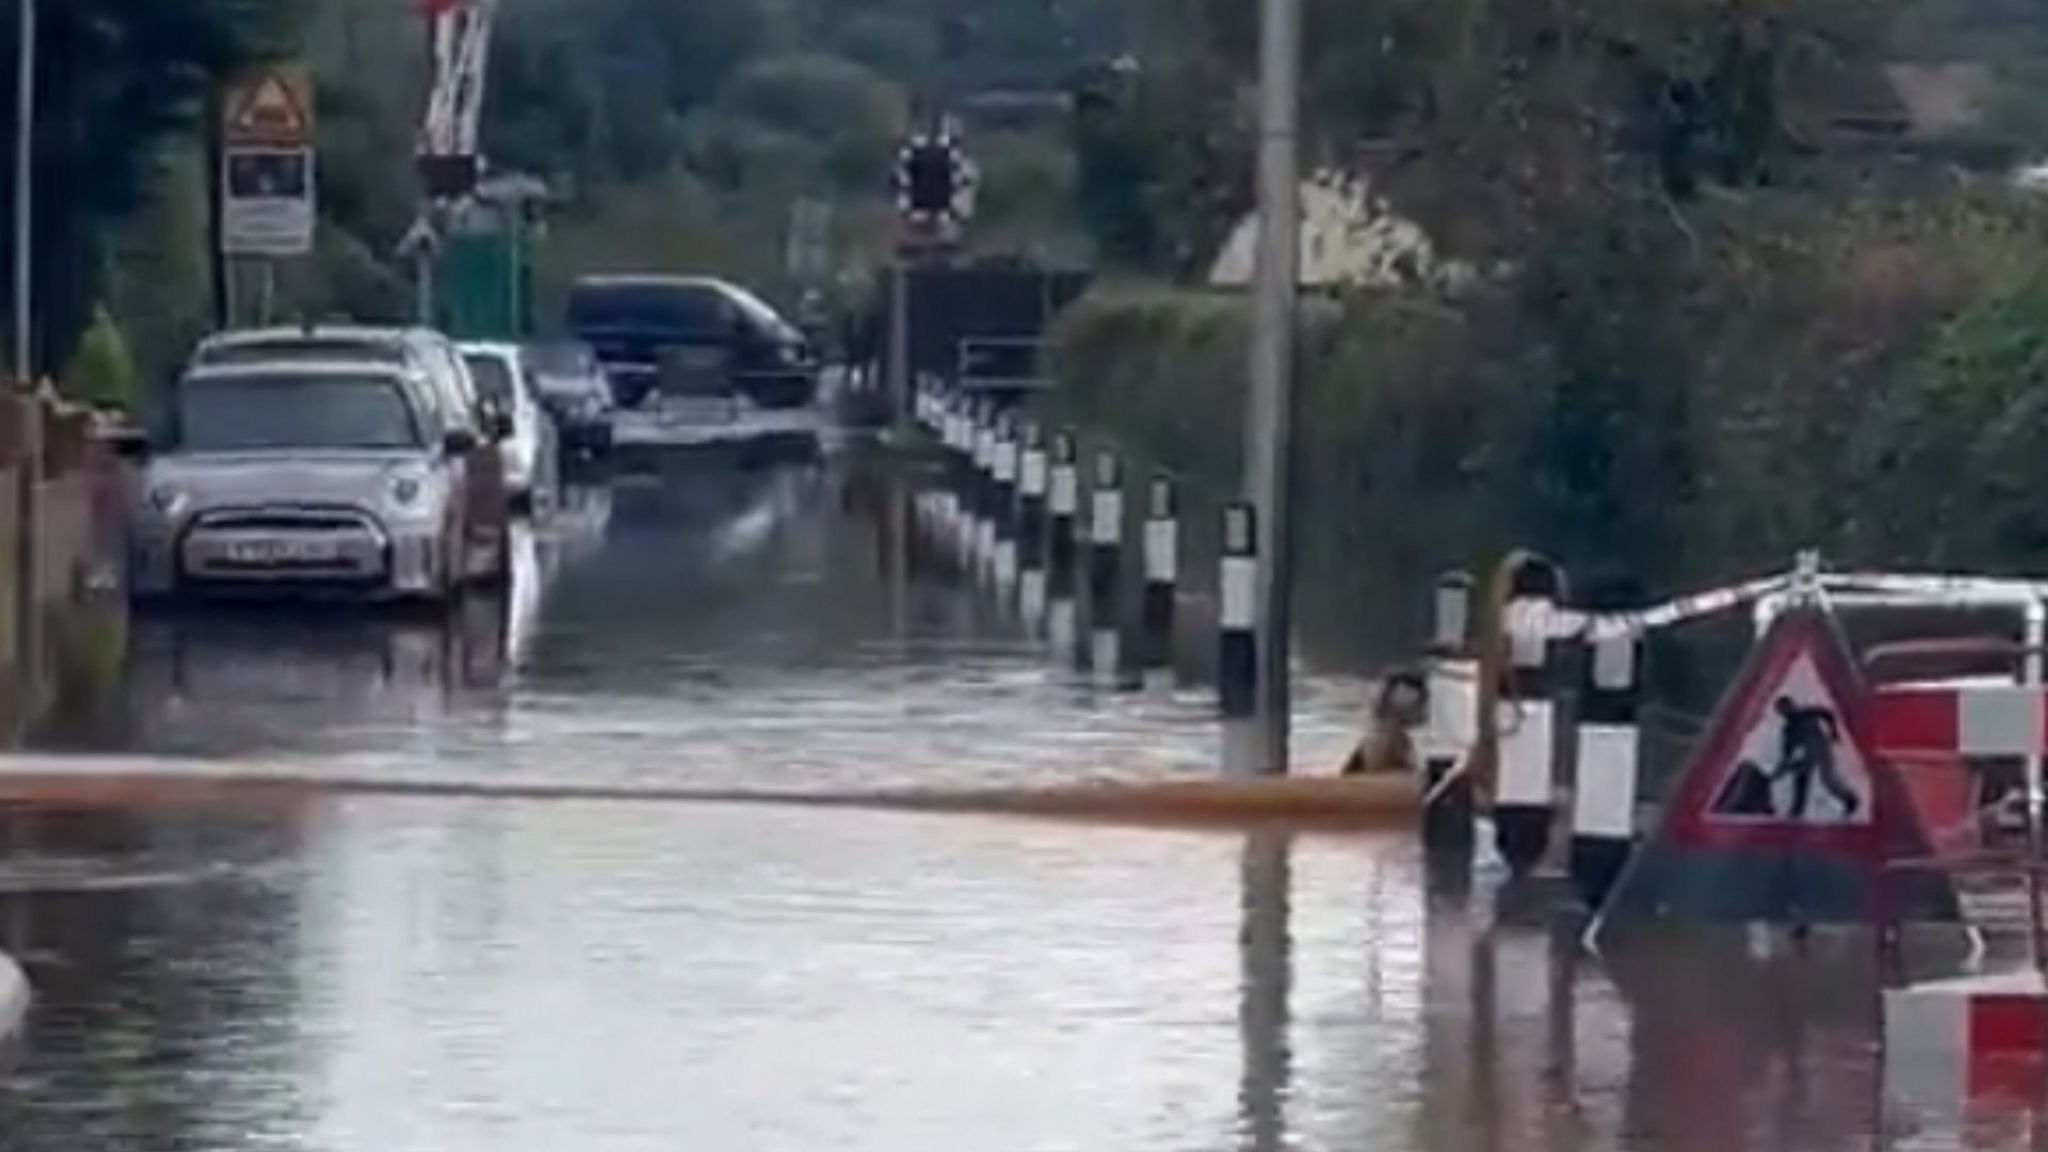 Flood waters in Retford seen in a video from Nottinghamshire Fire and Rescue